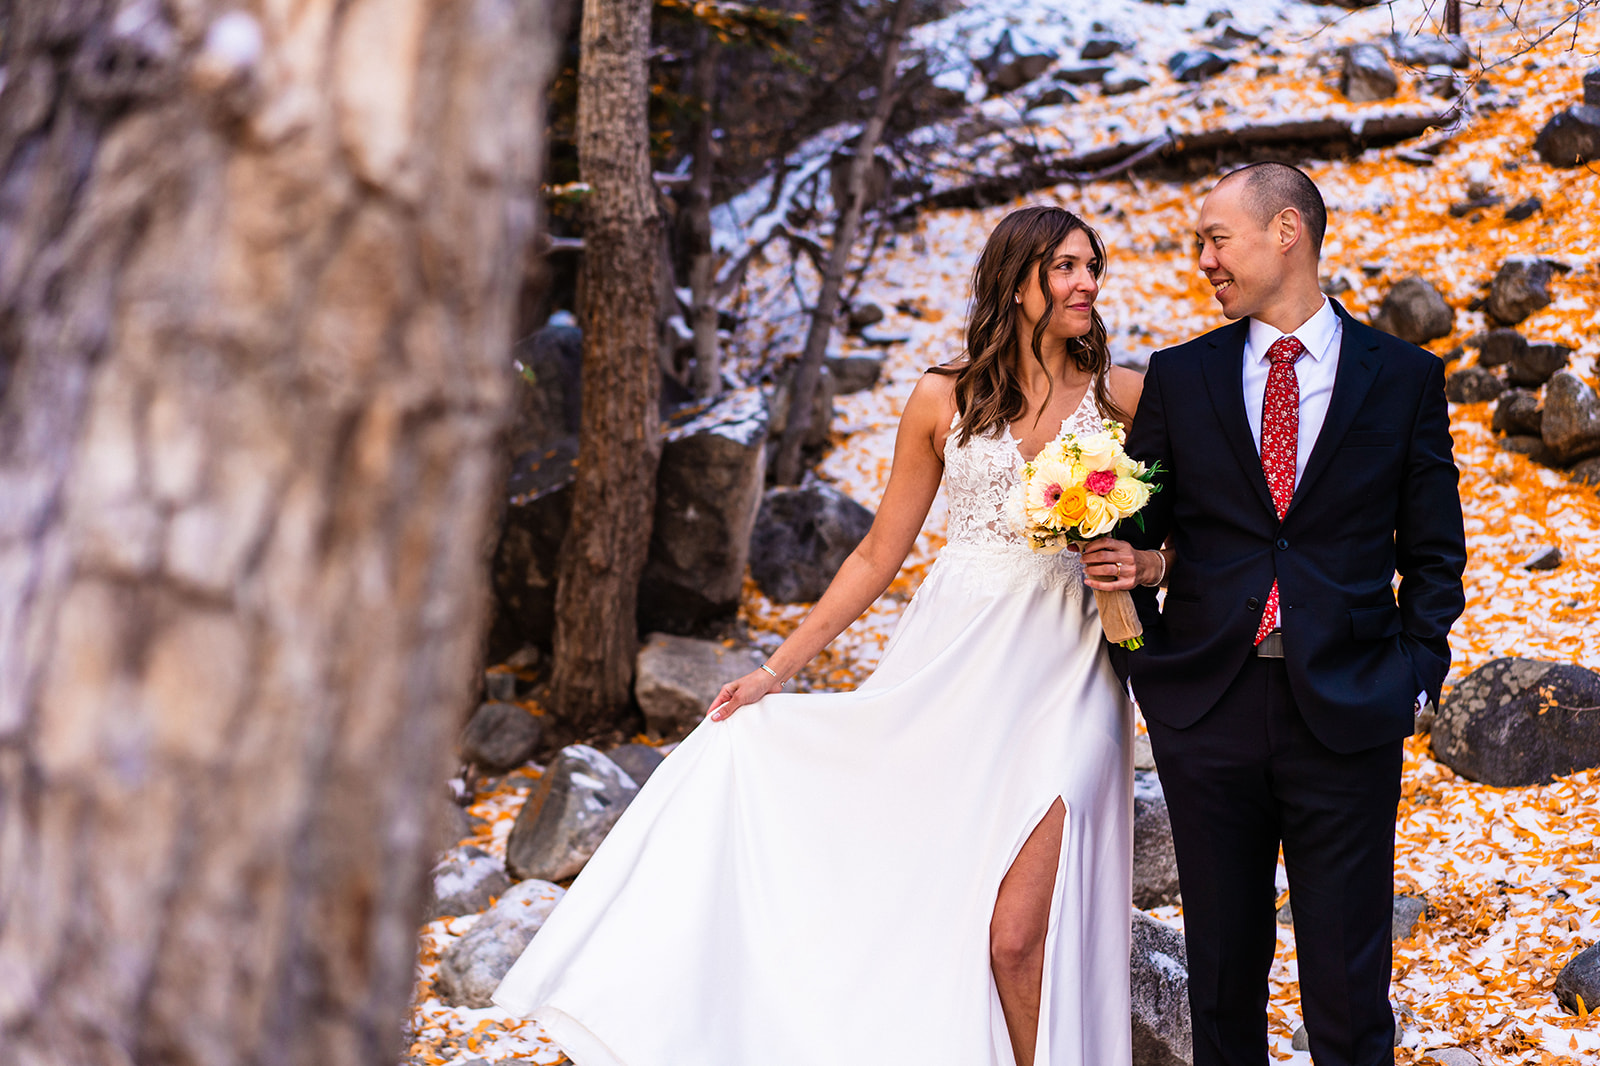 A bride and groom standing in front of a tree in the snow smiling at one another.